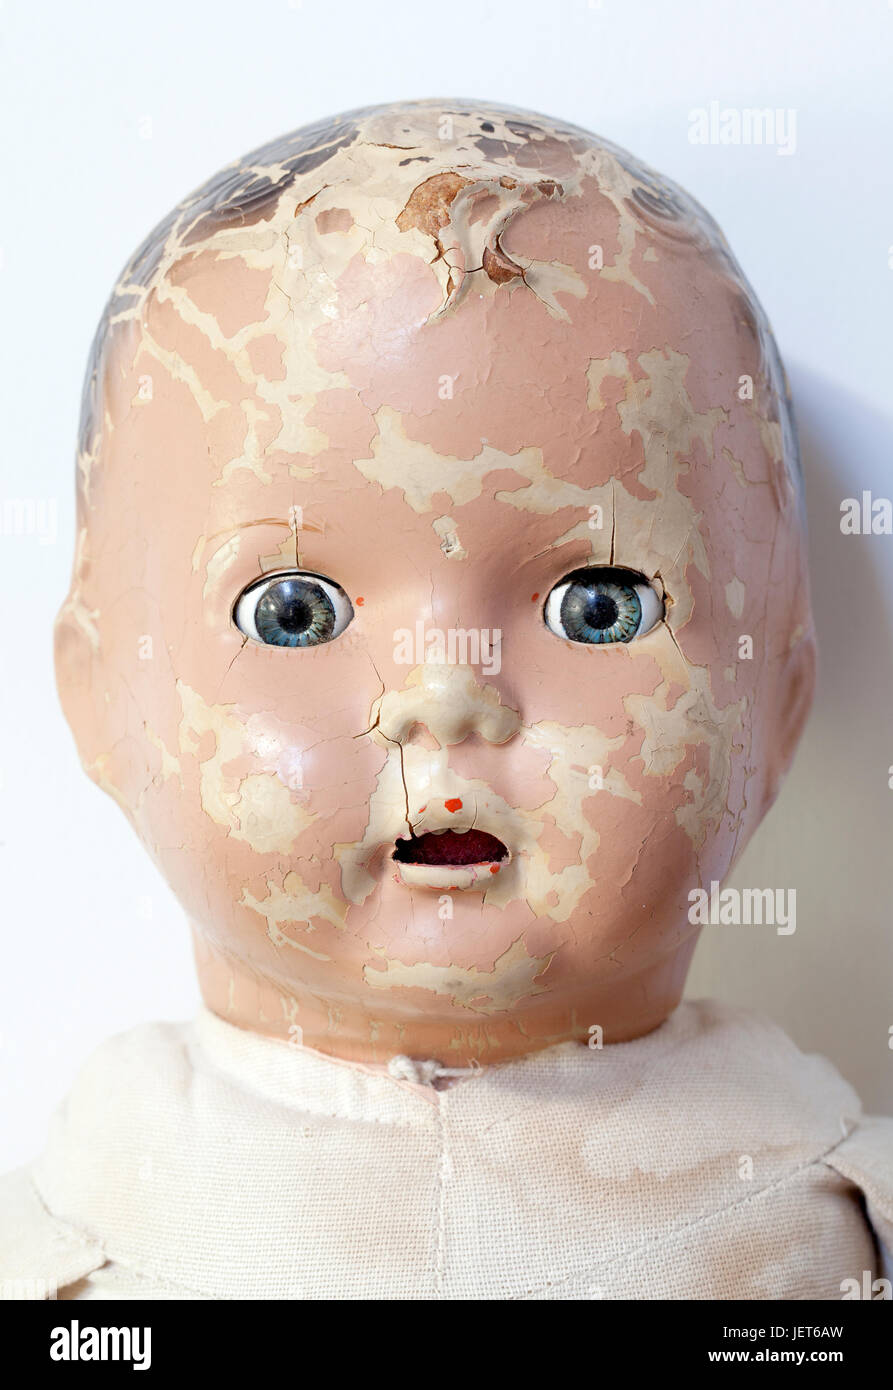 Old or Vintage Baby Dolls Face Stock Photo - Alamy